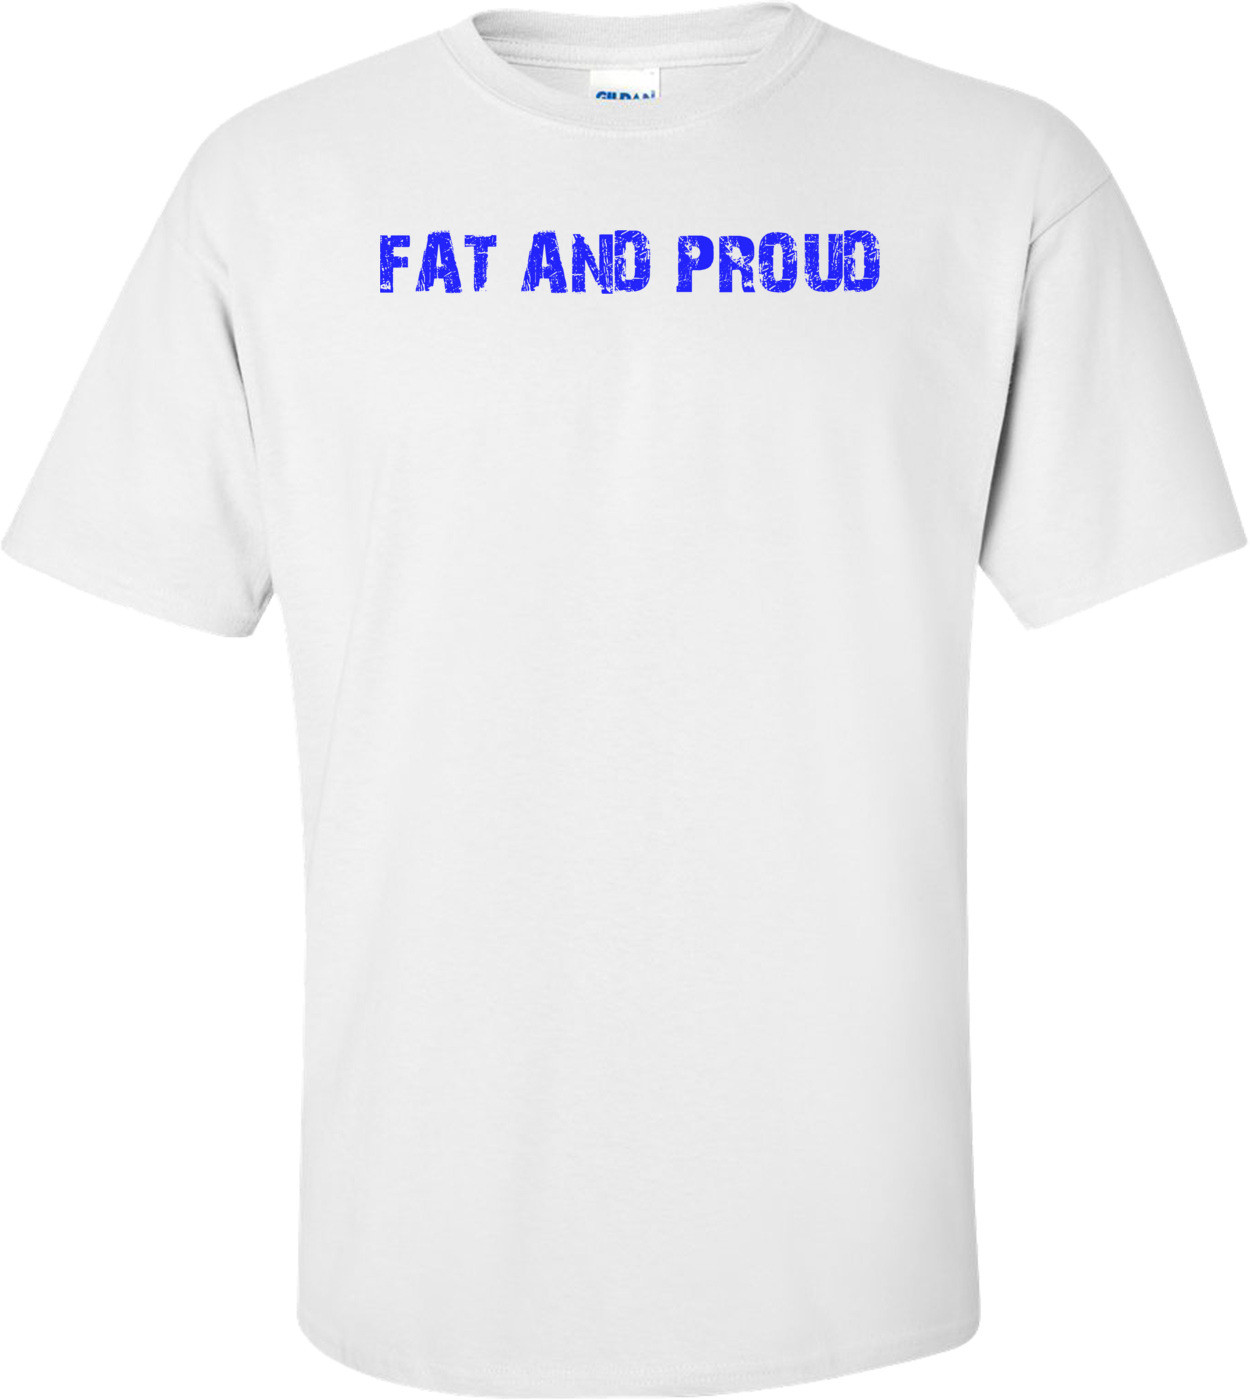 FAT AND PROUD